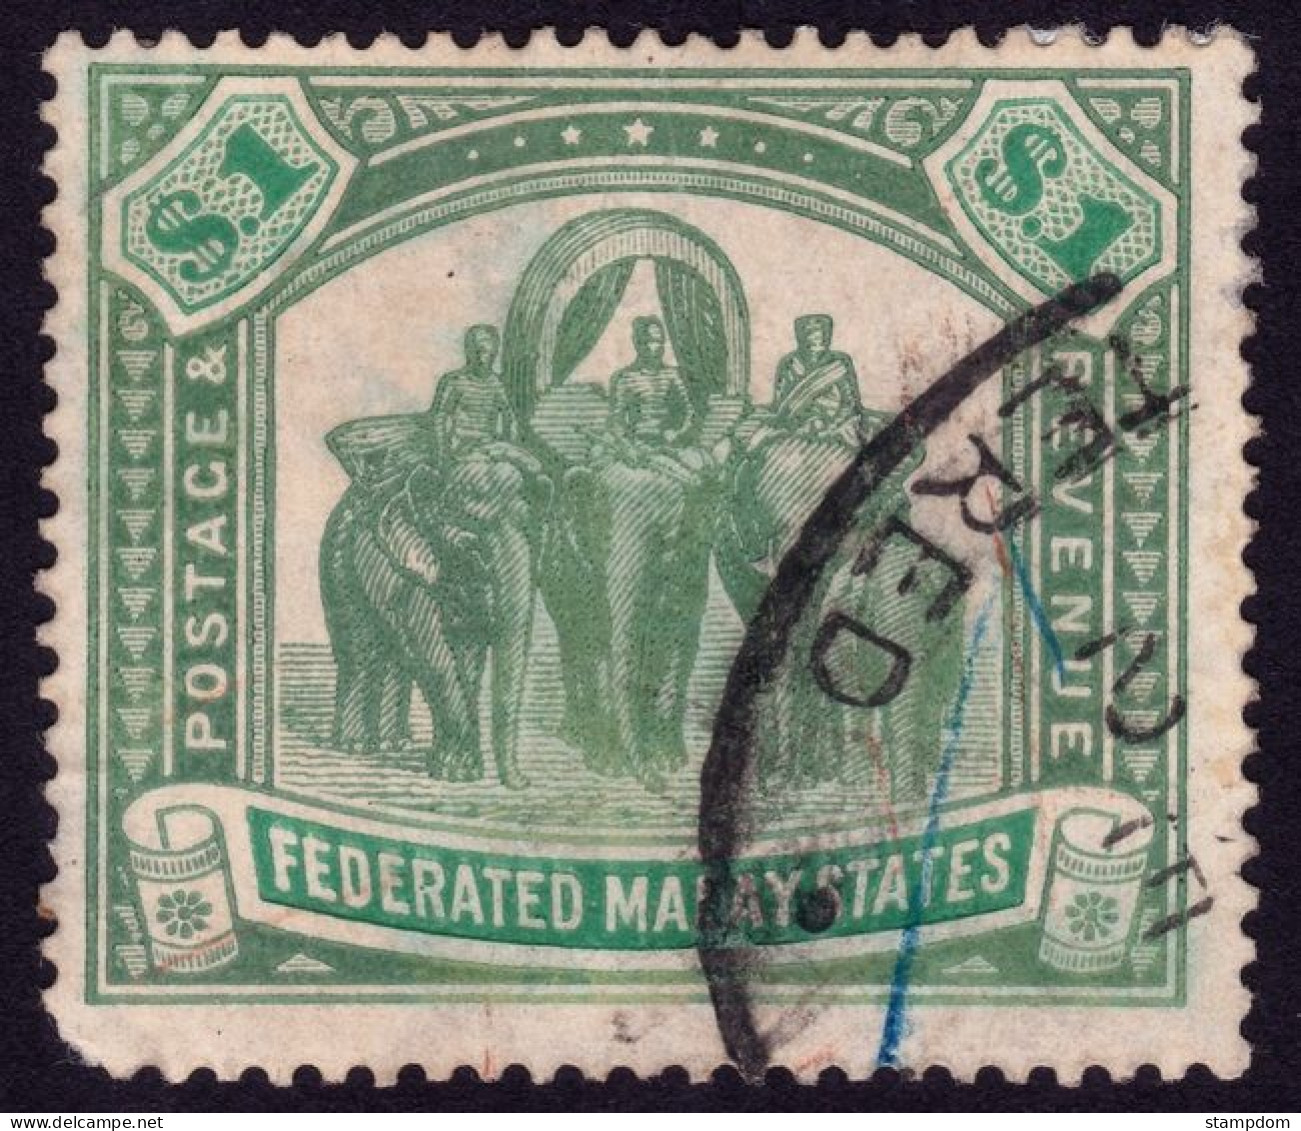 FEDERATED MALAY STATES FMS 1907 $1 Wmk.MCA Sc#34 - USED - Short Corne Perf  @TE237 - Federated Malay States